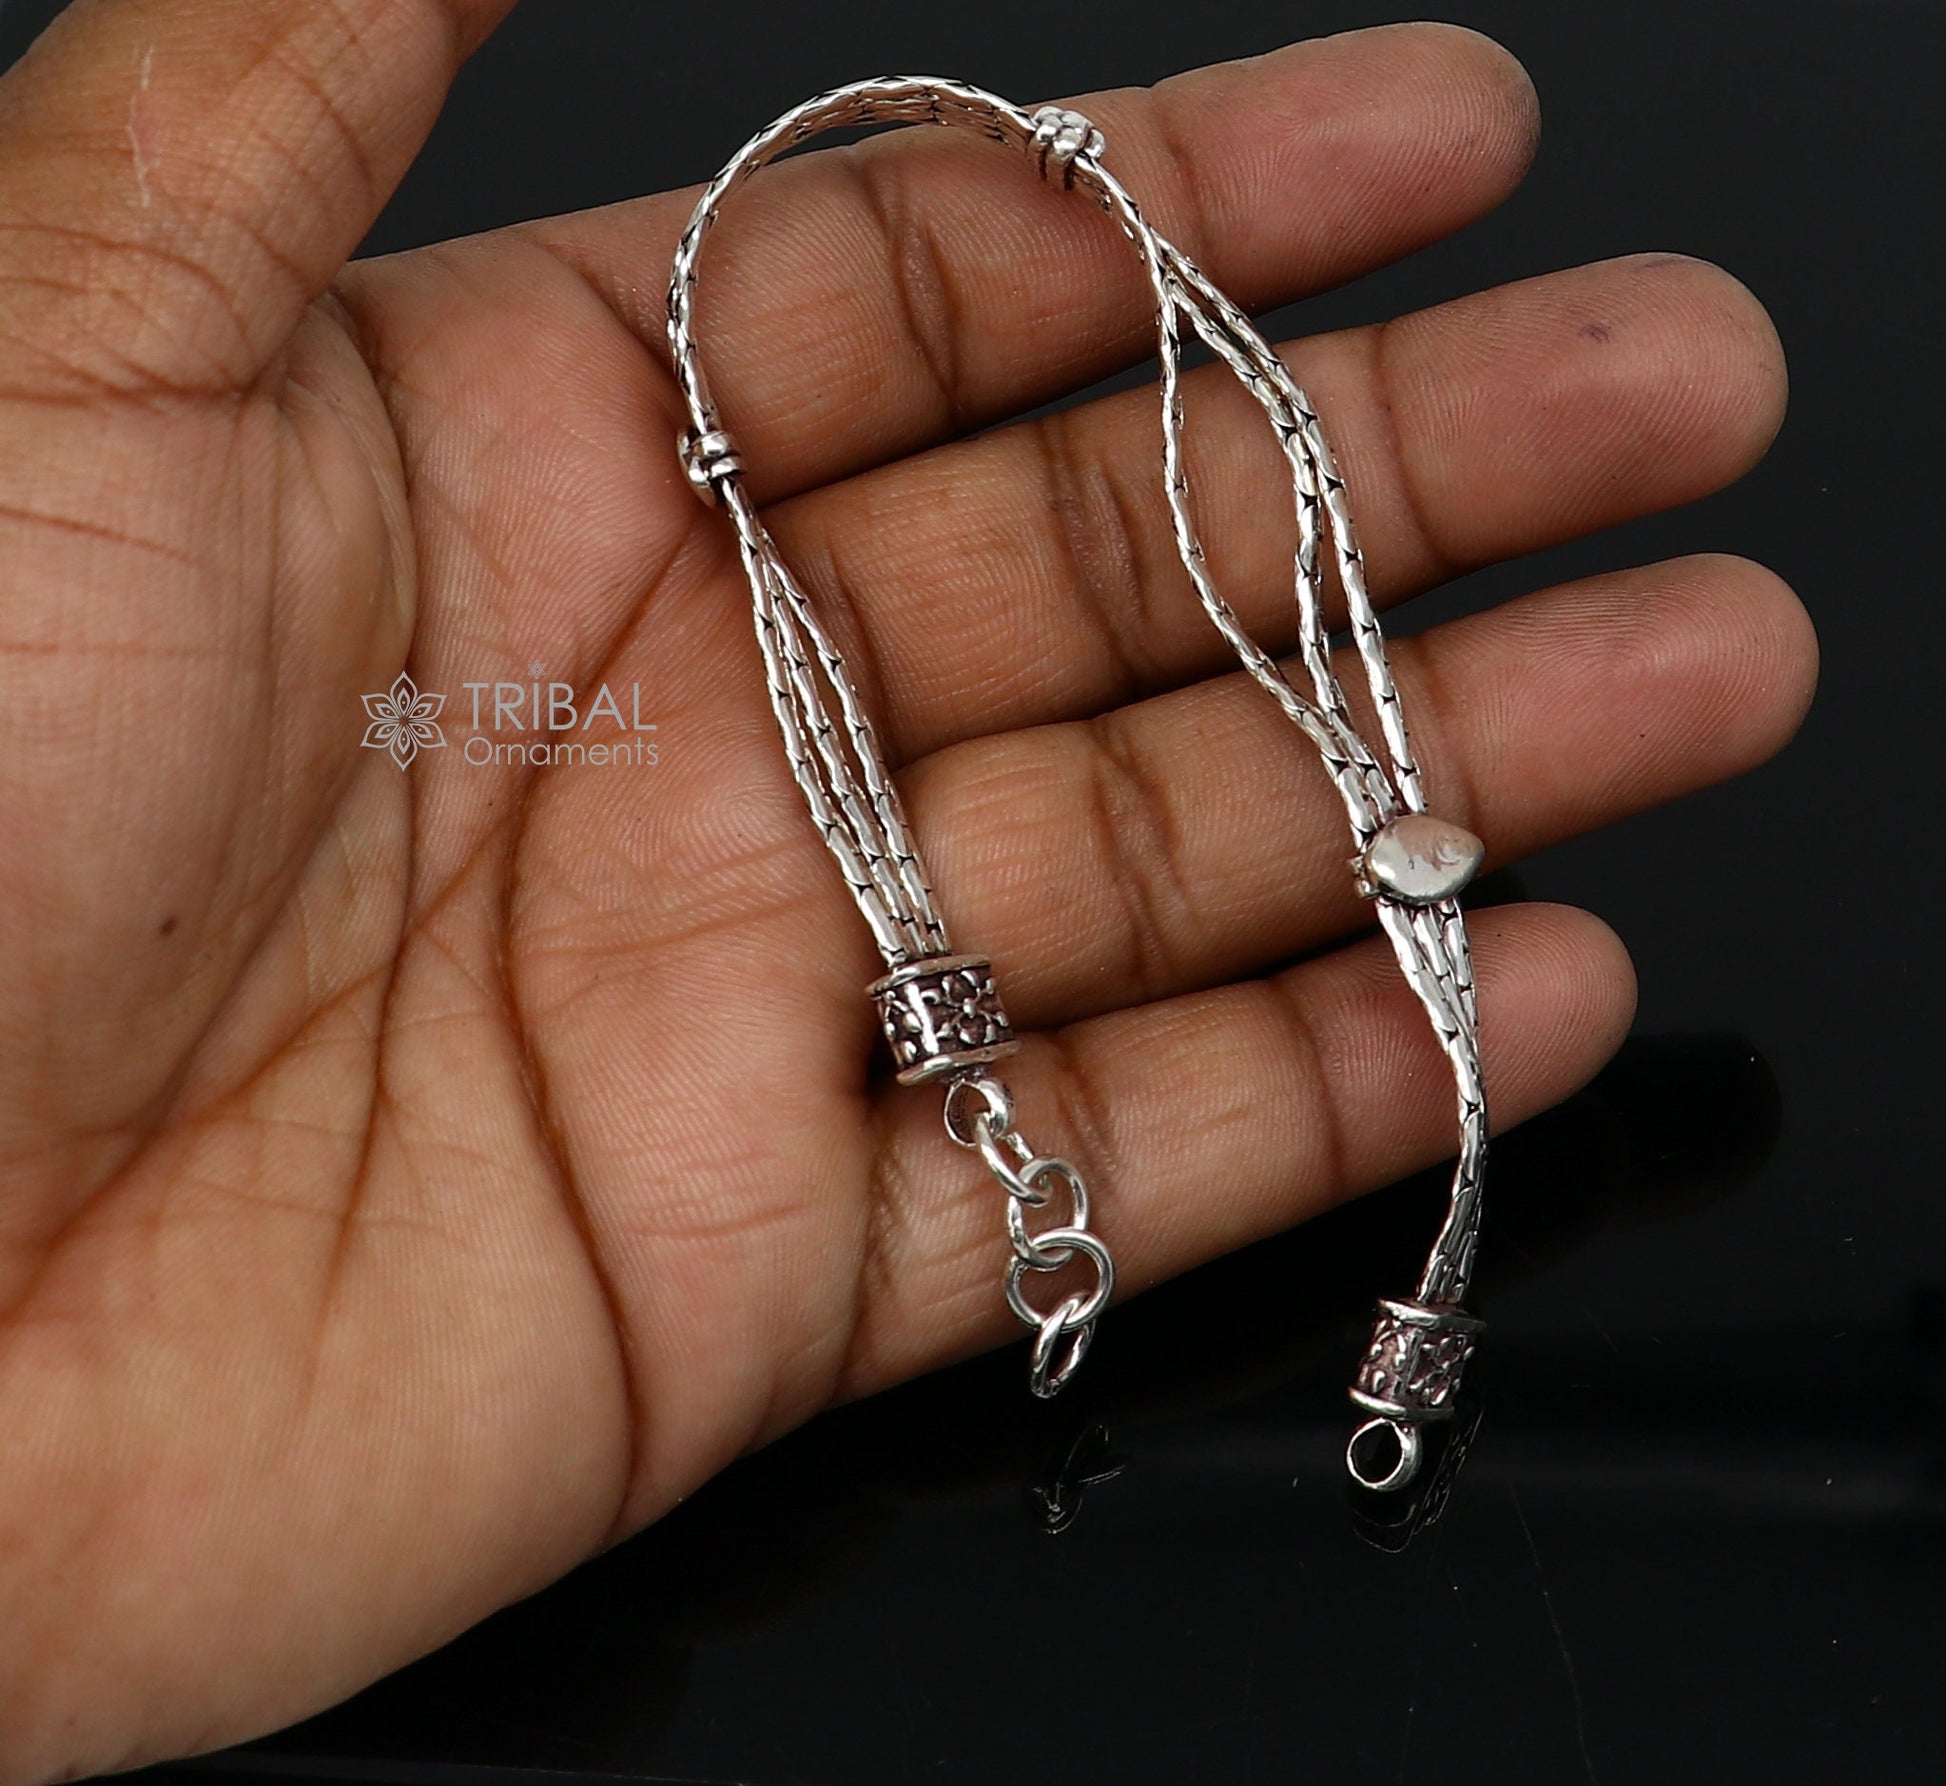 Vintage designer 925 sterling silver handmade 3 line chain 8.5 inches customized bracelet, Amazing oxidized personalized gift sbr698 - TRIBAL ORNAMENTS